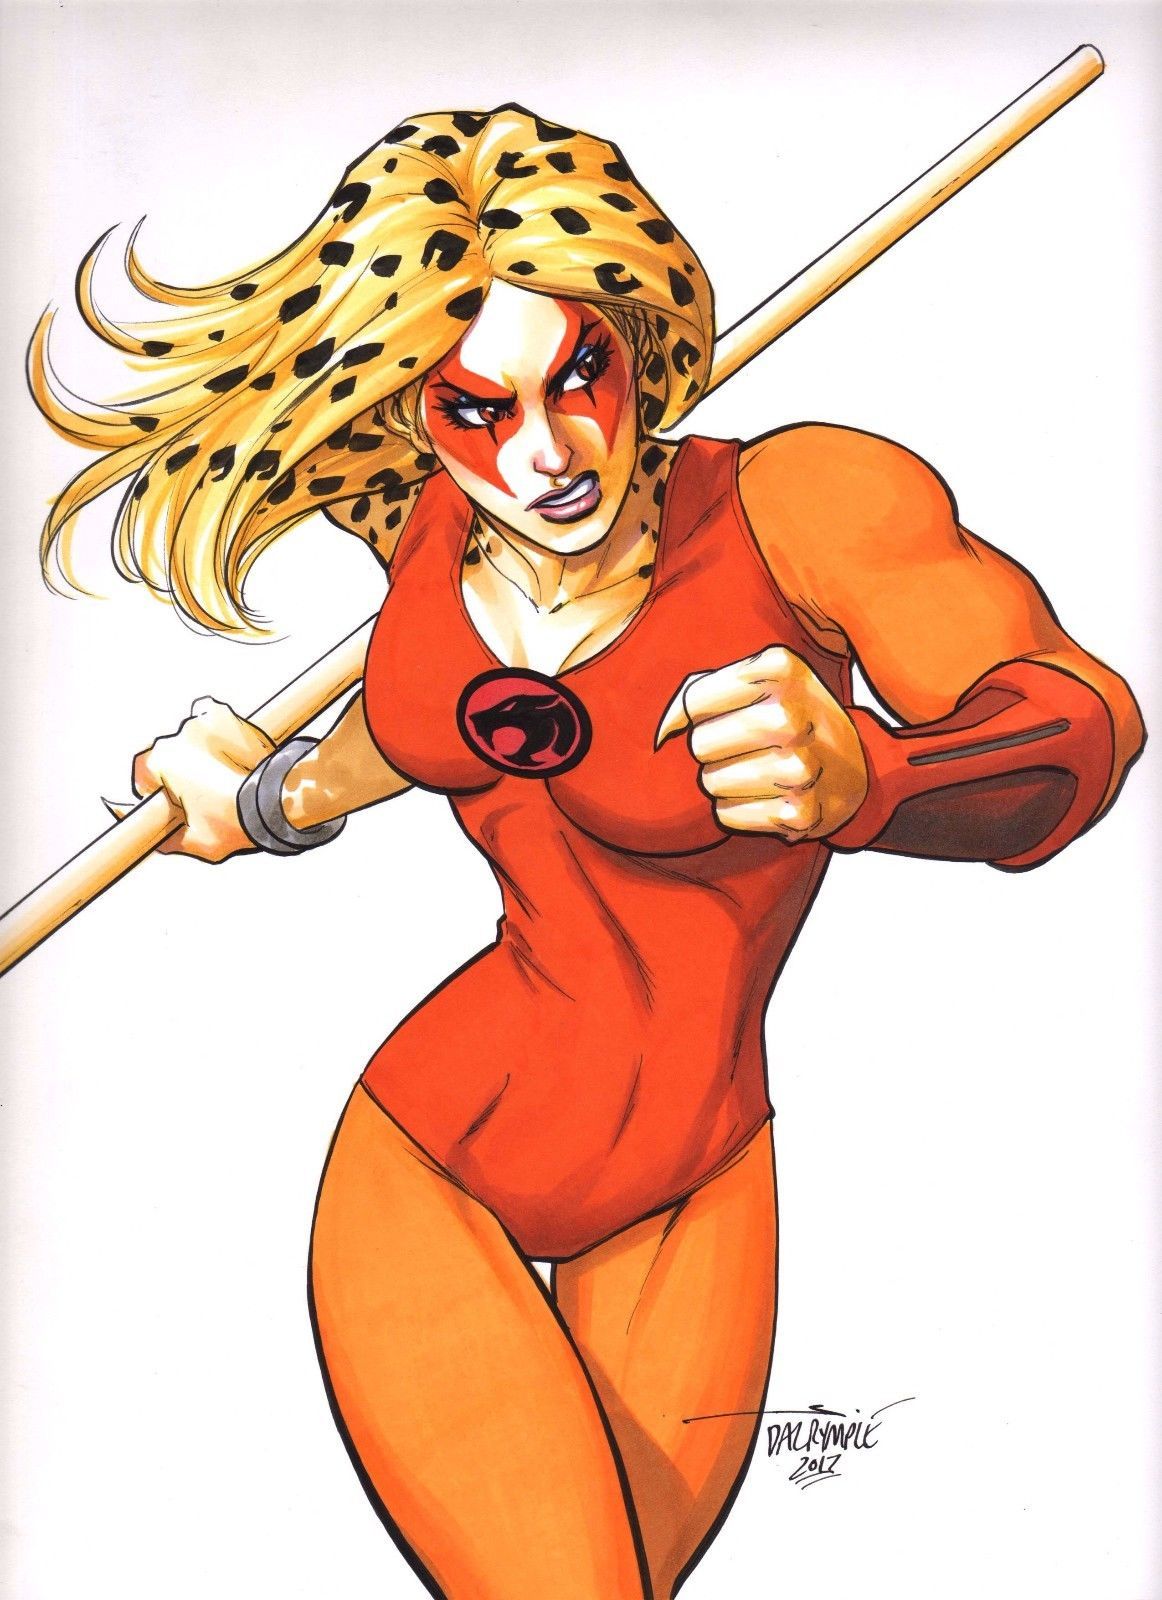 38 Hot Pictures Of Cheetara From Thundercats – One Of The Hottest 80’s Cartoon Character | Best Of Comic Books